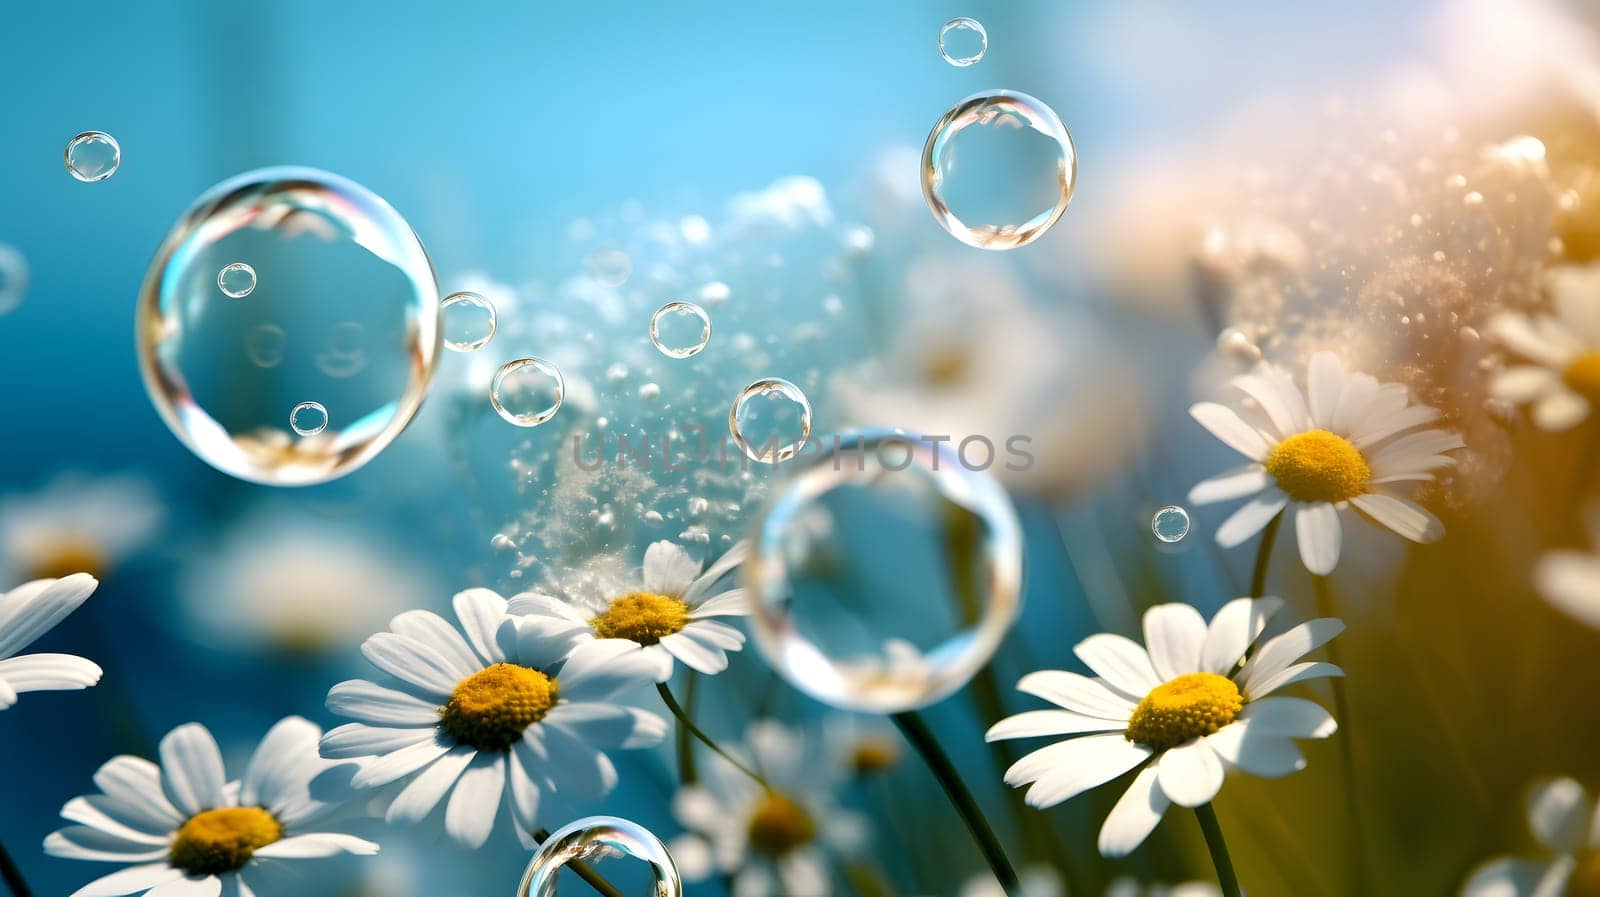 Spring motive light background and wallpaper with chamomiles, soap bubbles and bokeh, neural network generated photorealistic image by z1b